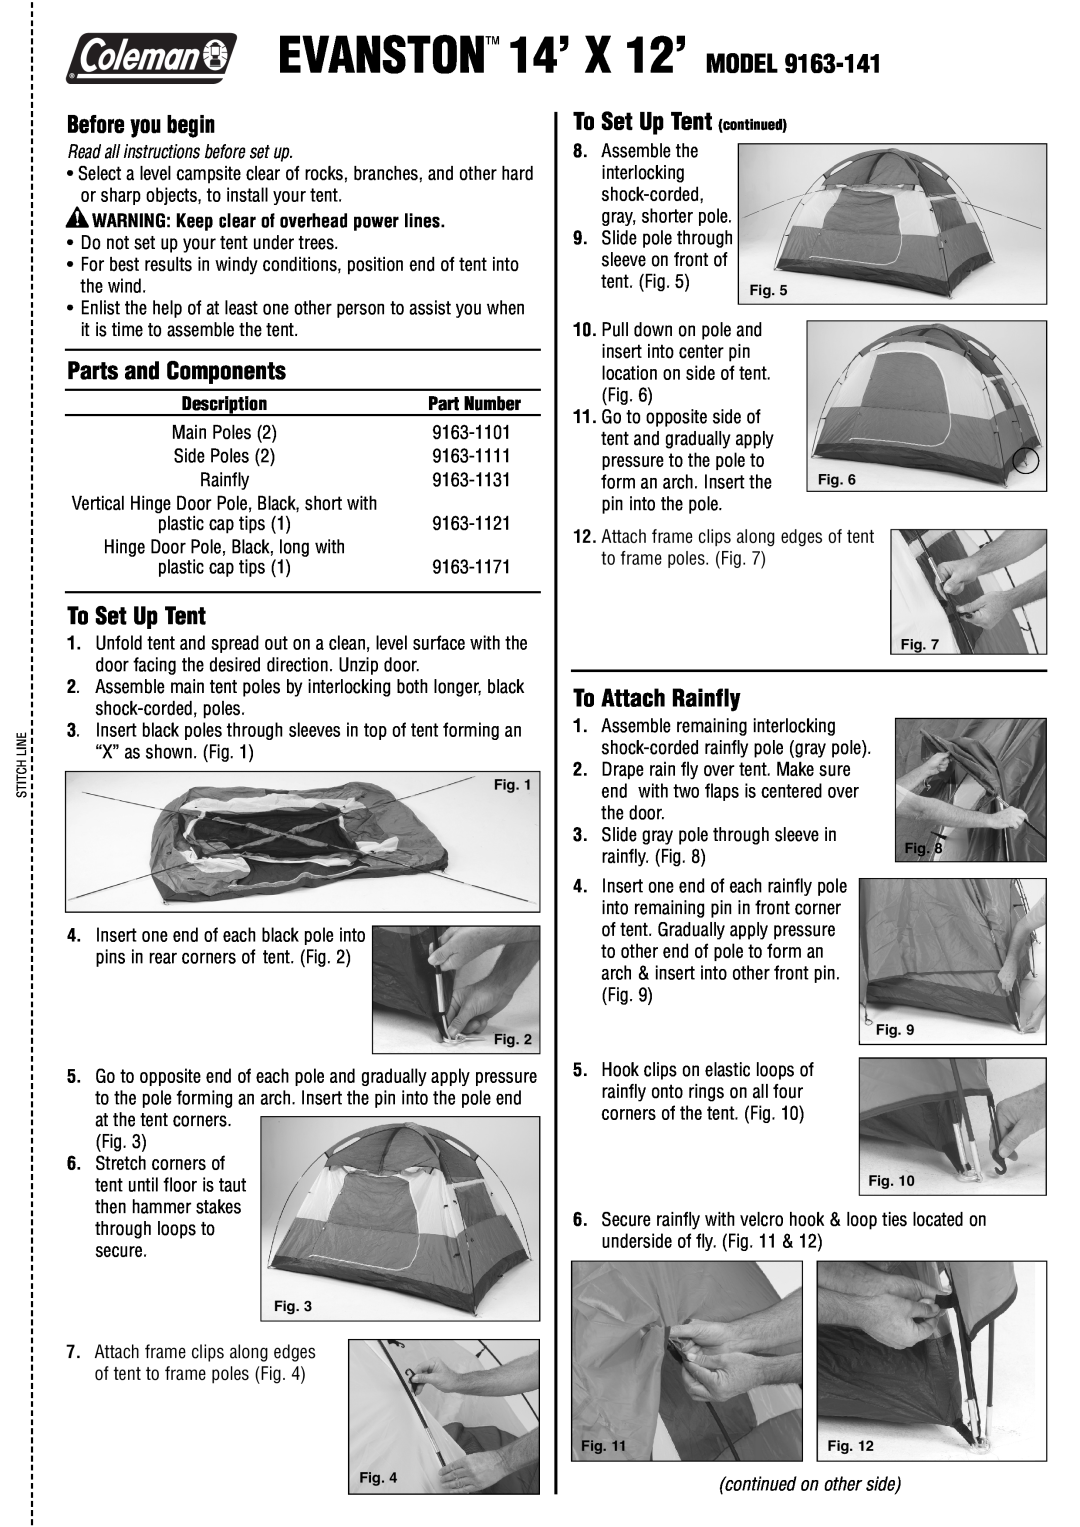 Coleman 9163-141 manual Before you begin, Parts and Components, To Set Up Tent continued, To Attach Rainfly, tent. Fig 